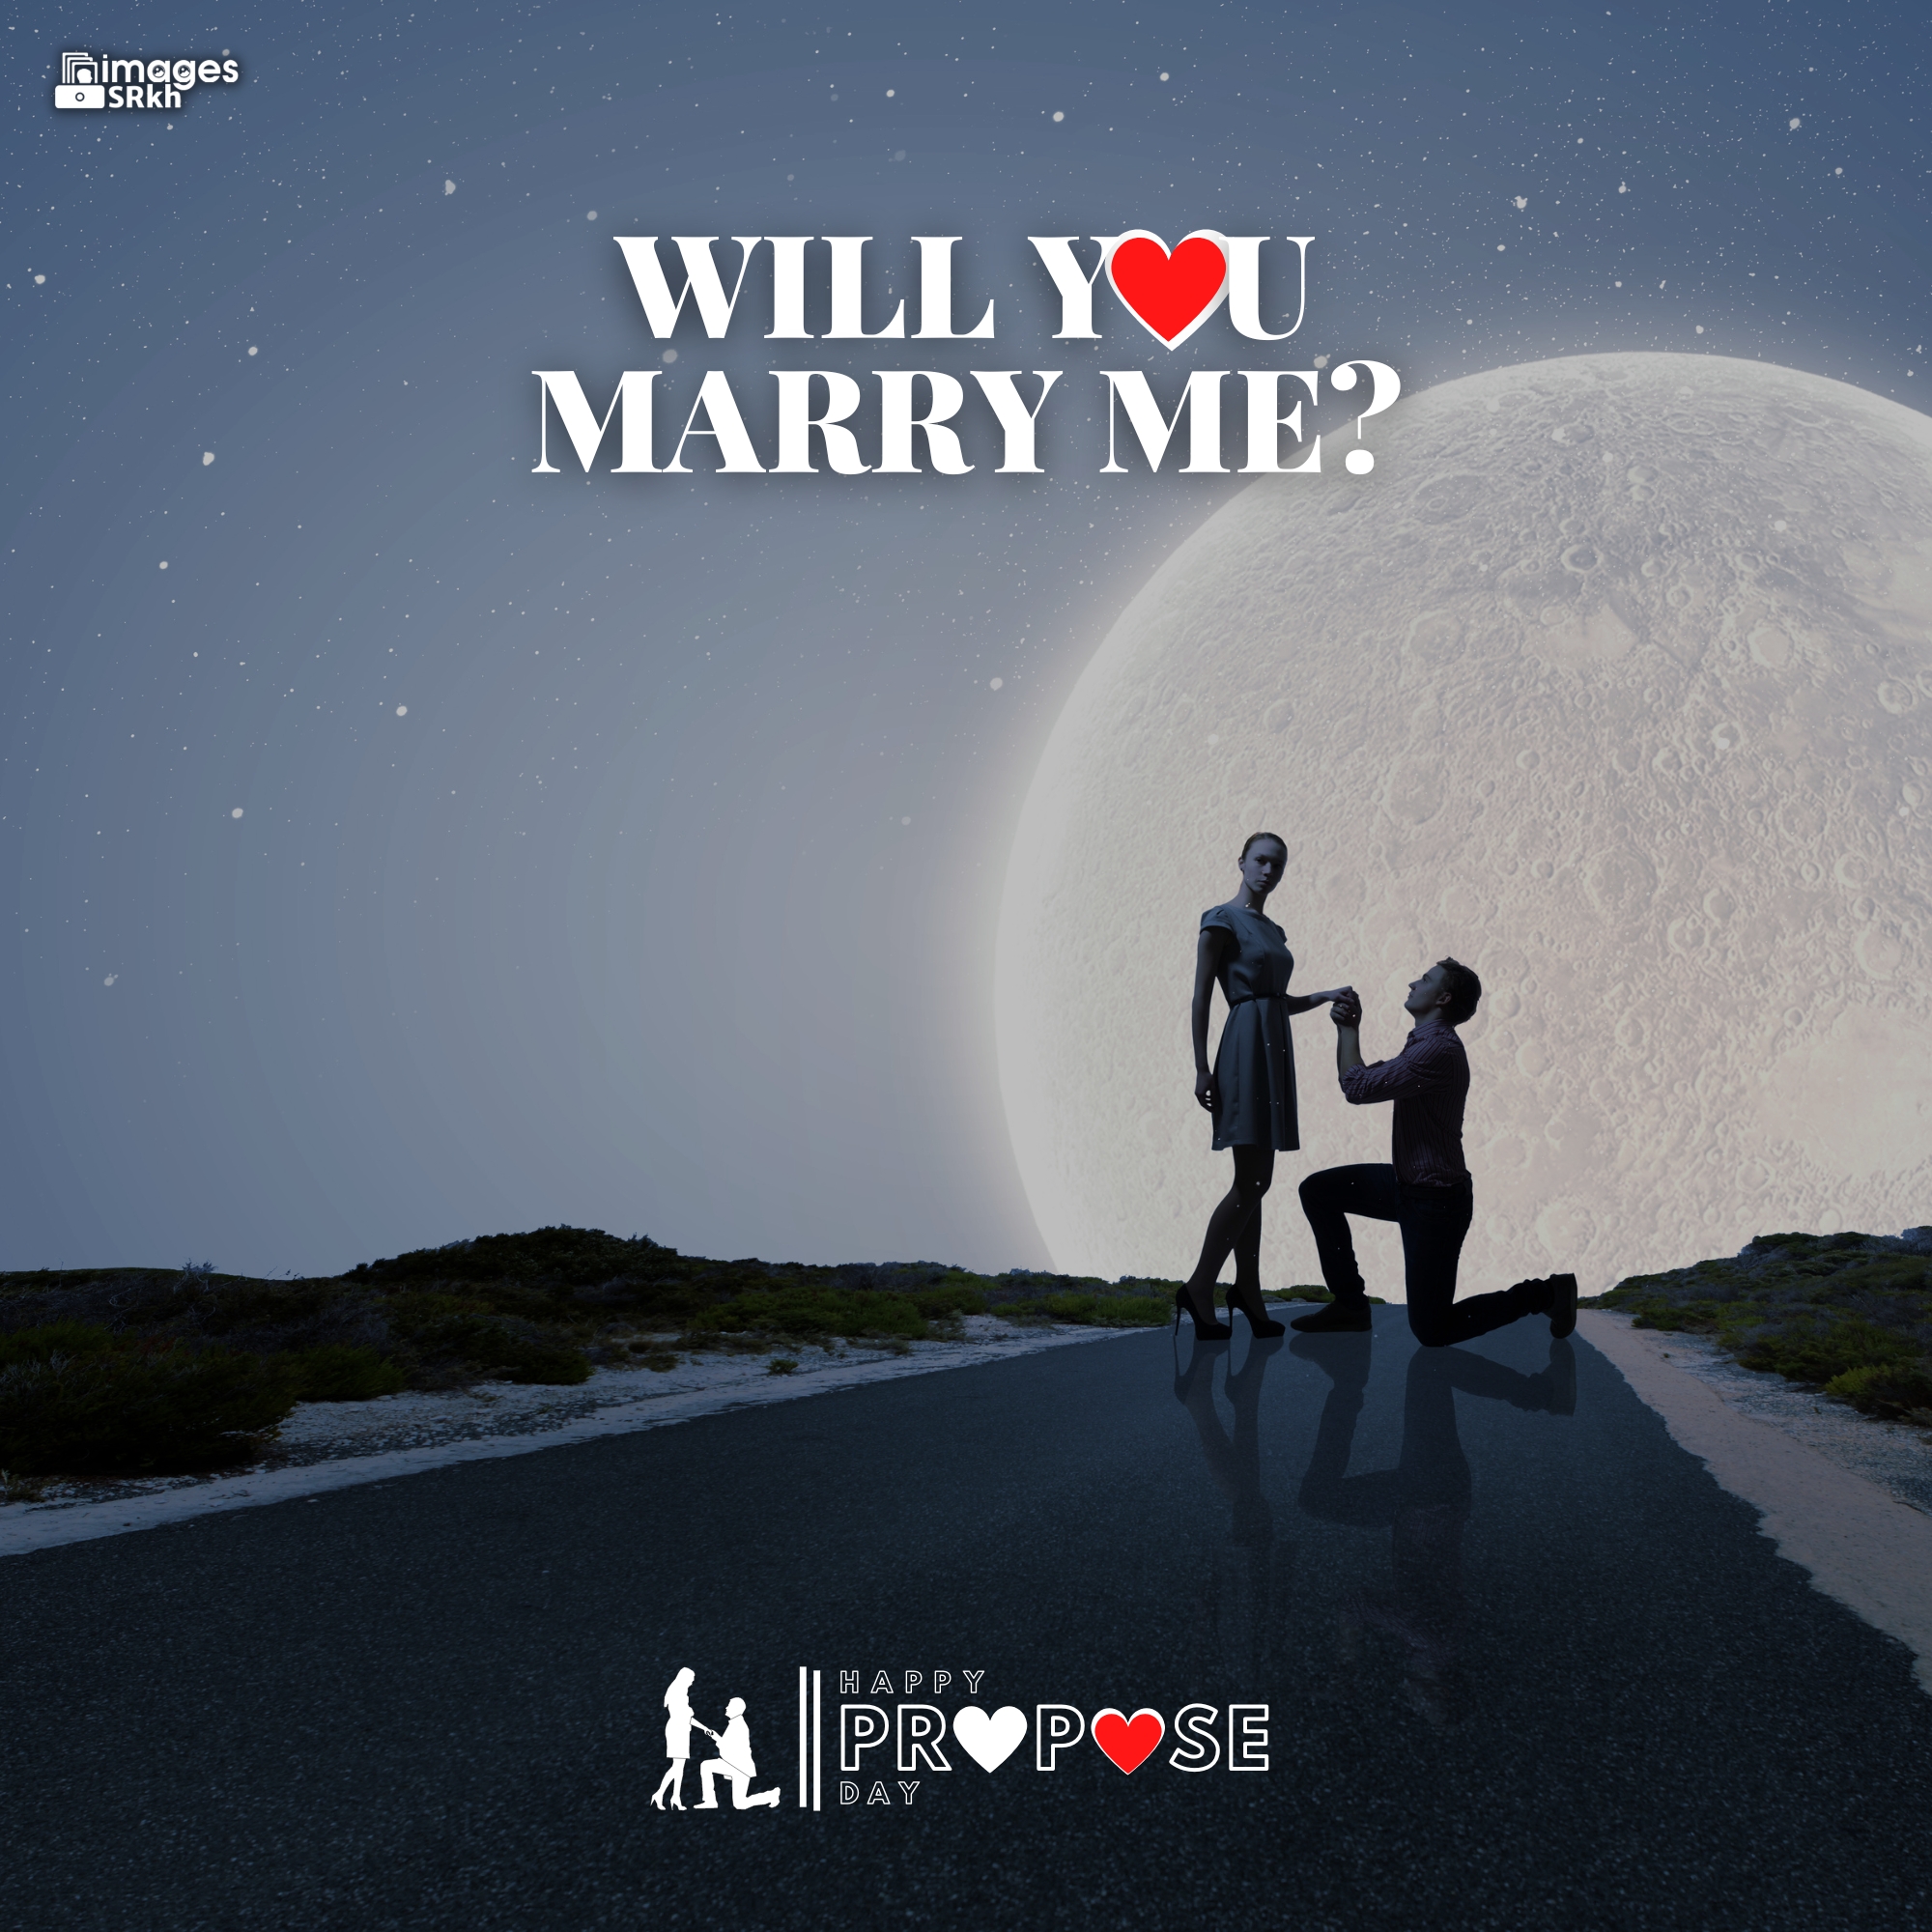 Propose Day Images | 290 | Will You MARRY ME